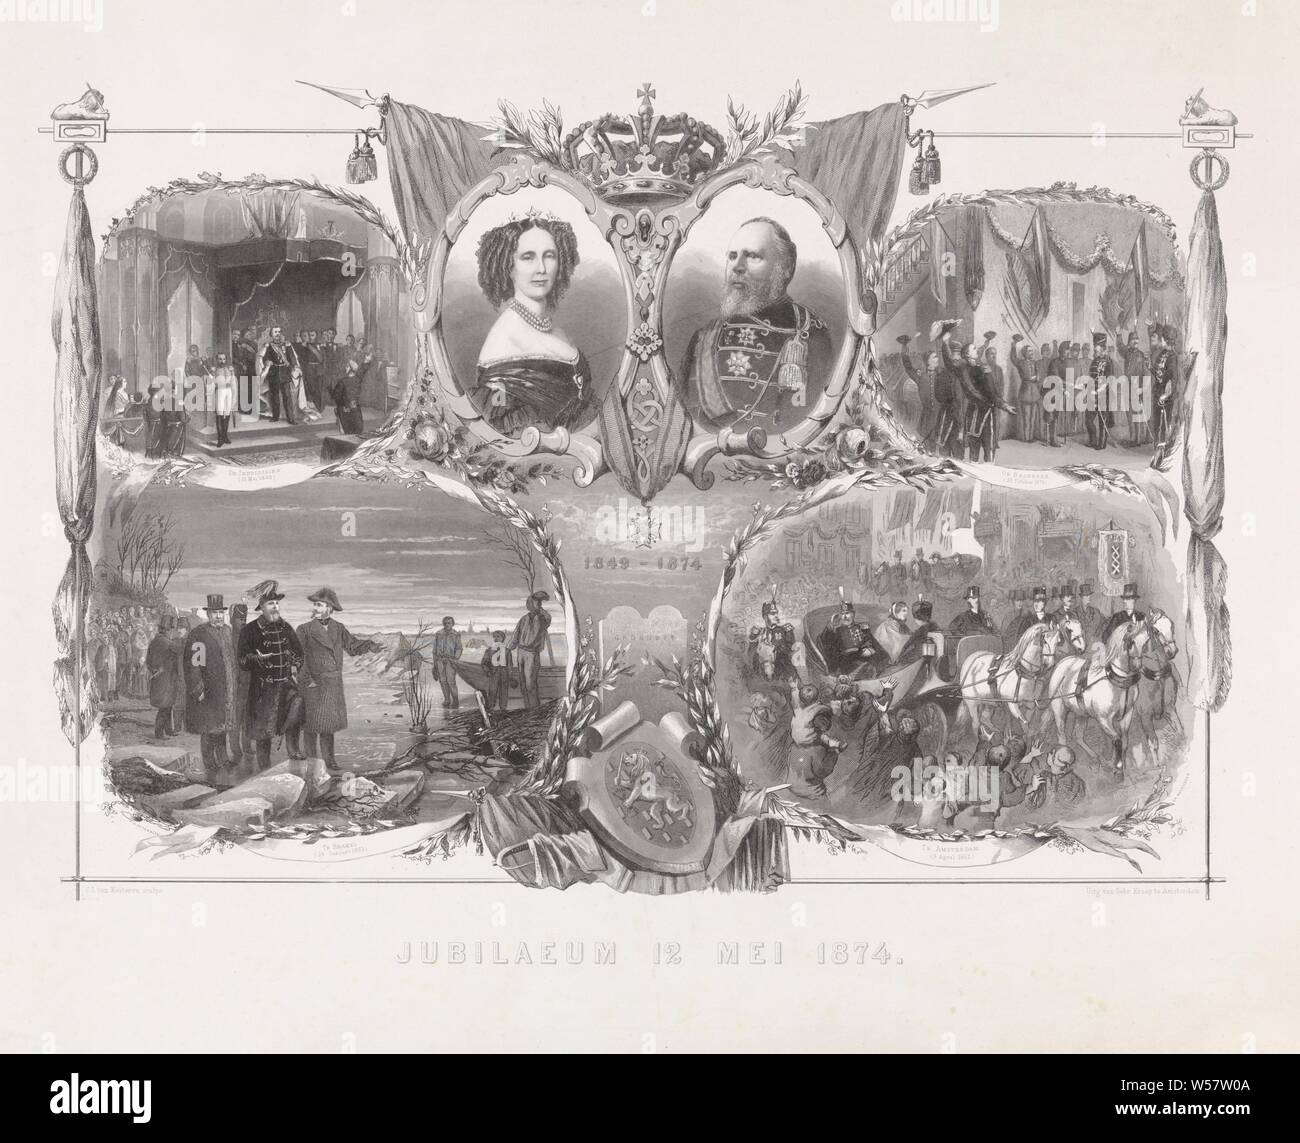 Twenty-five years anniversary of King William III and Queen Sophie, 1874 Jubilaeum May 12, 1874 (title on object), Print in honor of the twenty-five years anniversary of King Willem III and Queen Sophie, 1874. In the middle the portraits of King Willem III and Queen Sophie, both half-length in an oval with the crown in between. Around the portraits four cartouches containing important events from the reign of William III, such as the inauguration on 12 May 1849. At the bottom the coat of arms with the Dutch lion, with a bundle of arrows and behind it a stone with 'constitution', rescue work Stock Photo